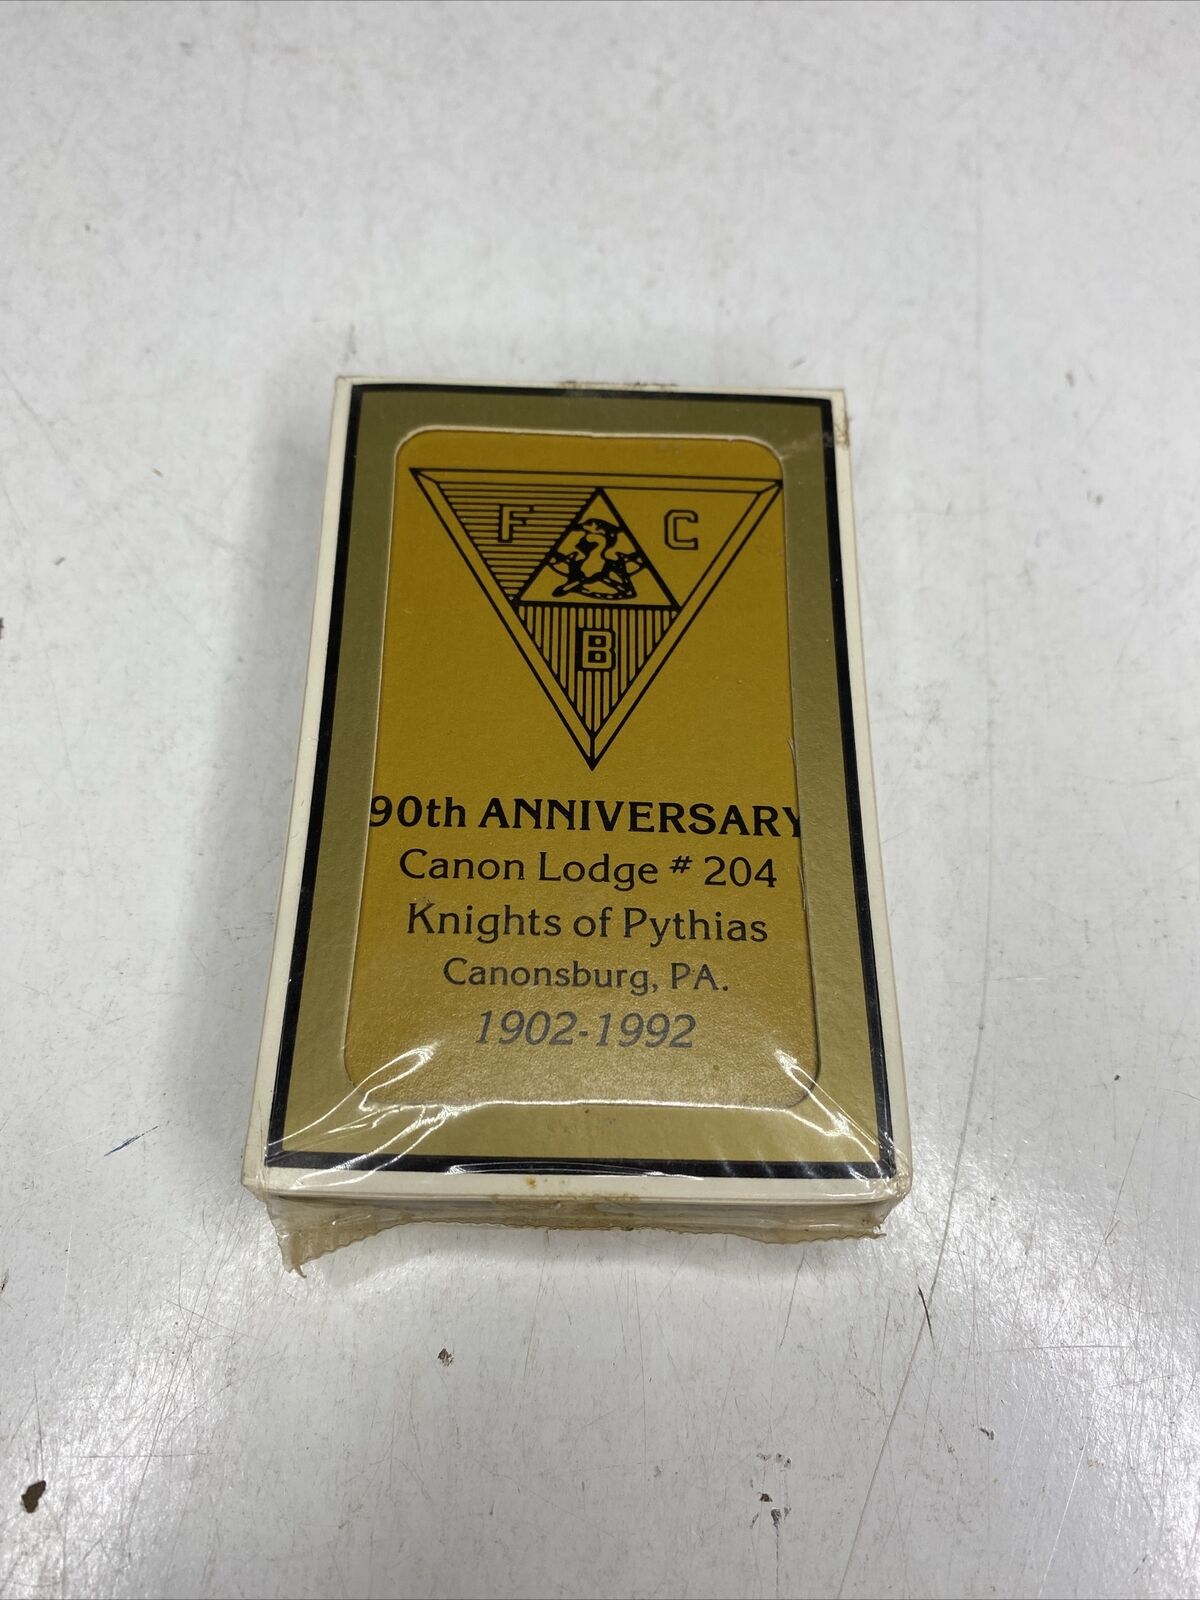 Vintage Knights of Pythias Deck of Bridge Playing Cards (Canonsburg, PA) Sealed Без бренда